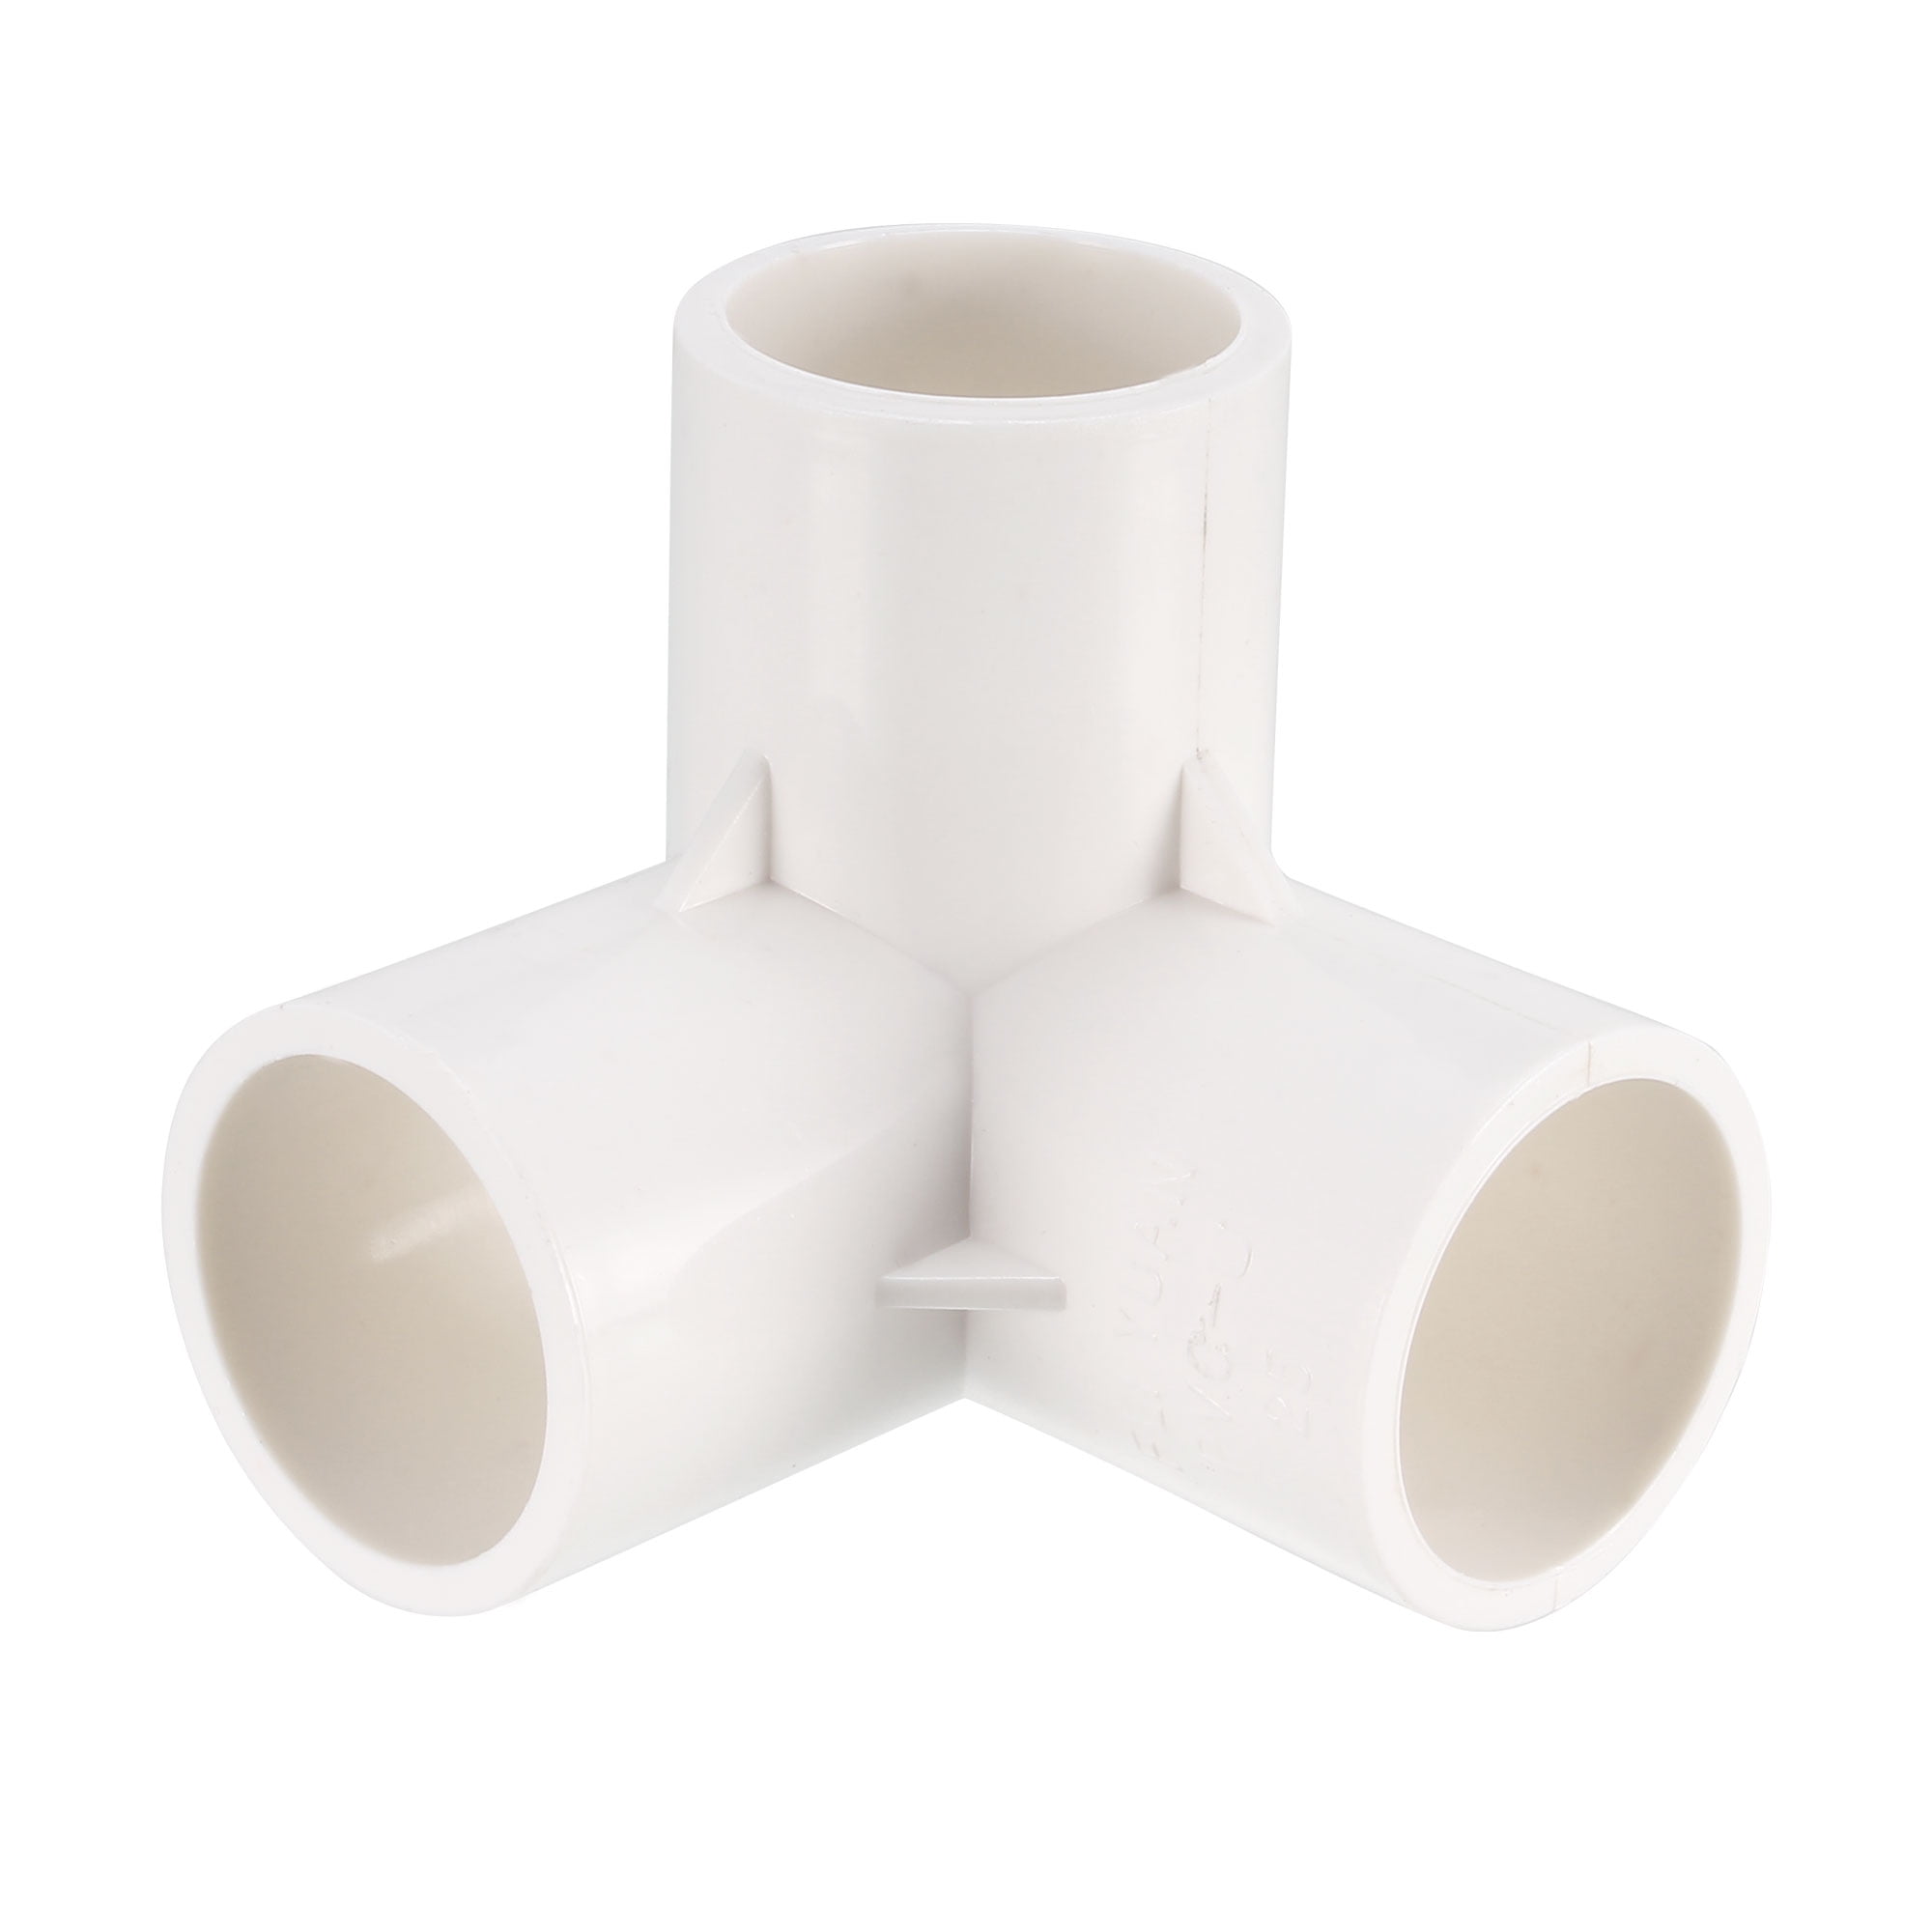 18Pack 3-Way Elbow PVC Fittings 90 Degree Elbow Corner Fittings for Building PVC Furniture Greenhouse Shed Pipe Fittings Tent Connection 3/4Inch Furniture Grade PVC Fittings 3 Way Side Outlet Tees 